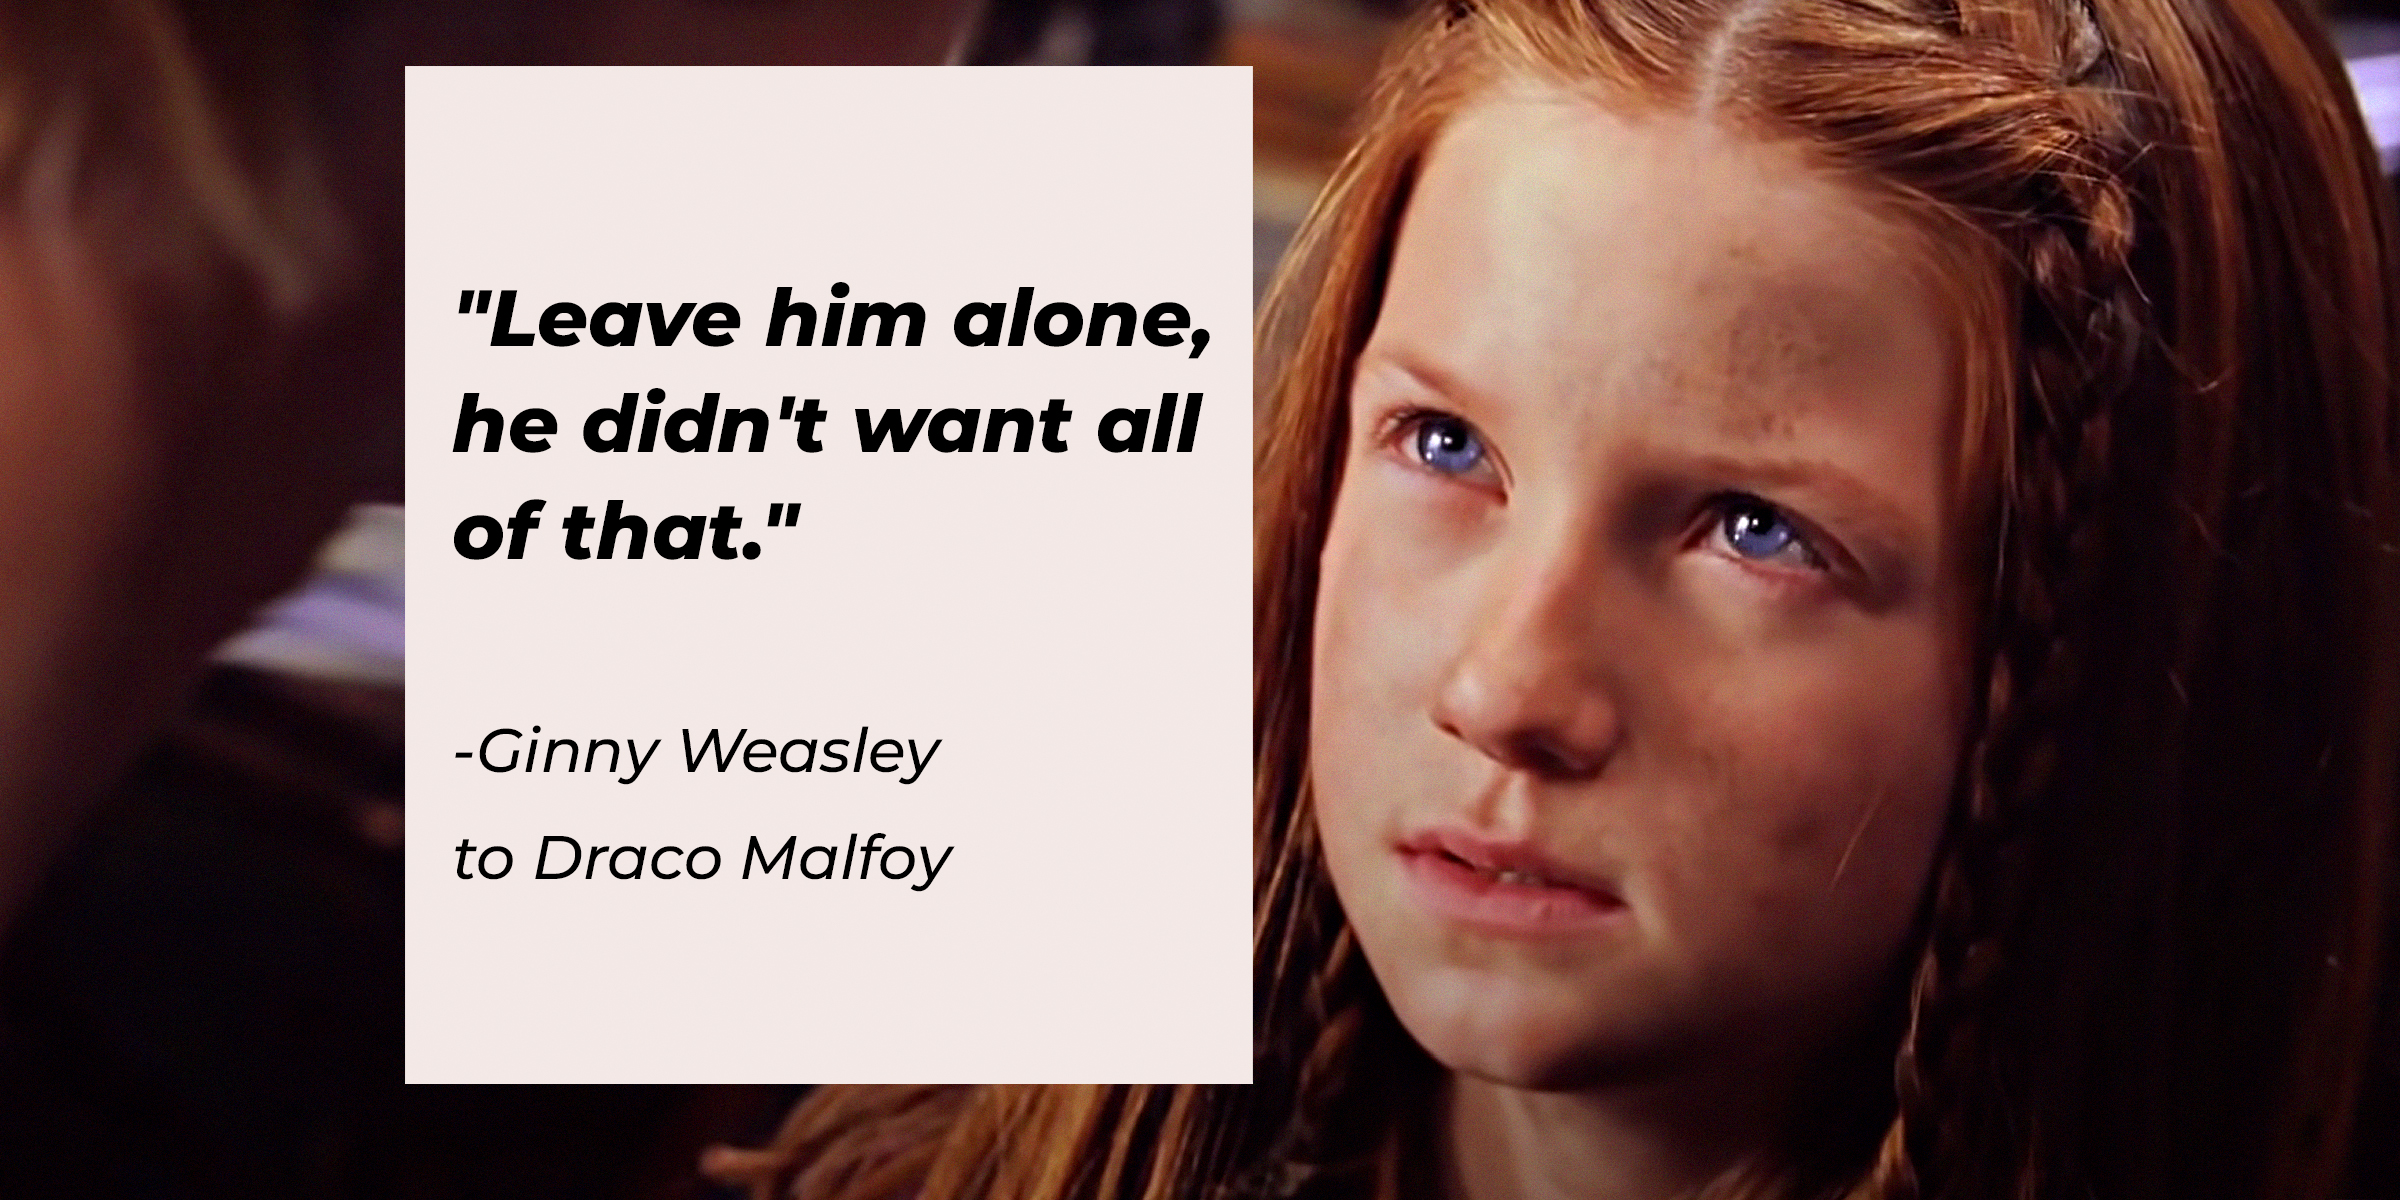 Ginny Weasley’s quote: "Leave him alone, he didn't want all of that." | Source: Youtube.com/harrypotter